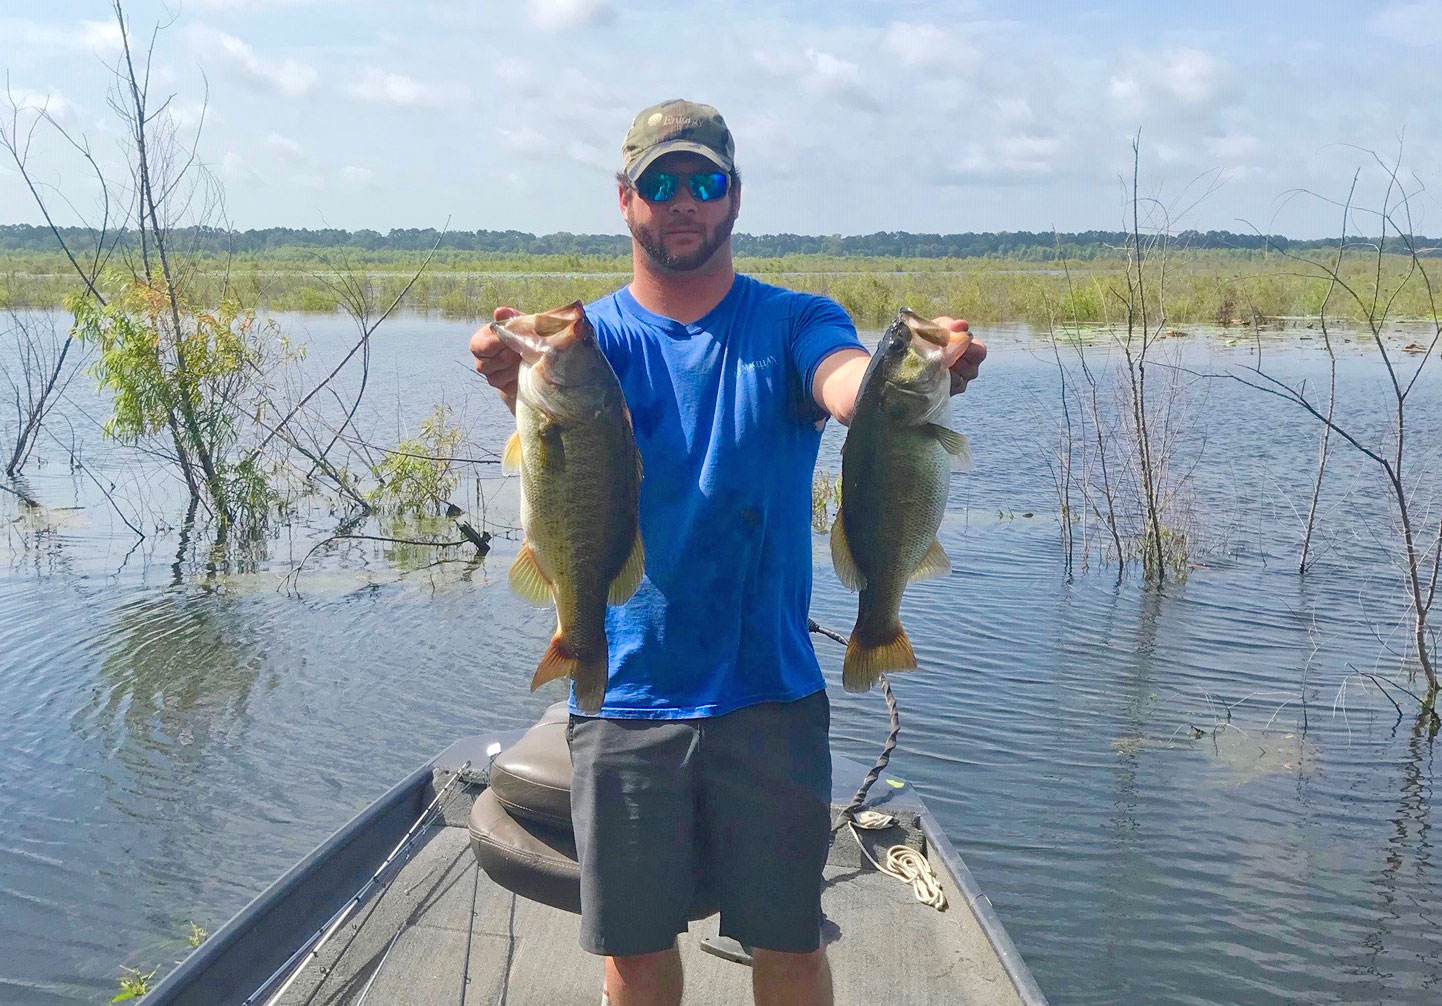 Jeremy Cooper was first in at the “new” Bussey” and it paid off with some good bass like these he and his father caught flipping brush with plastics.